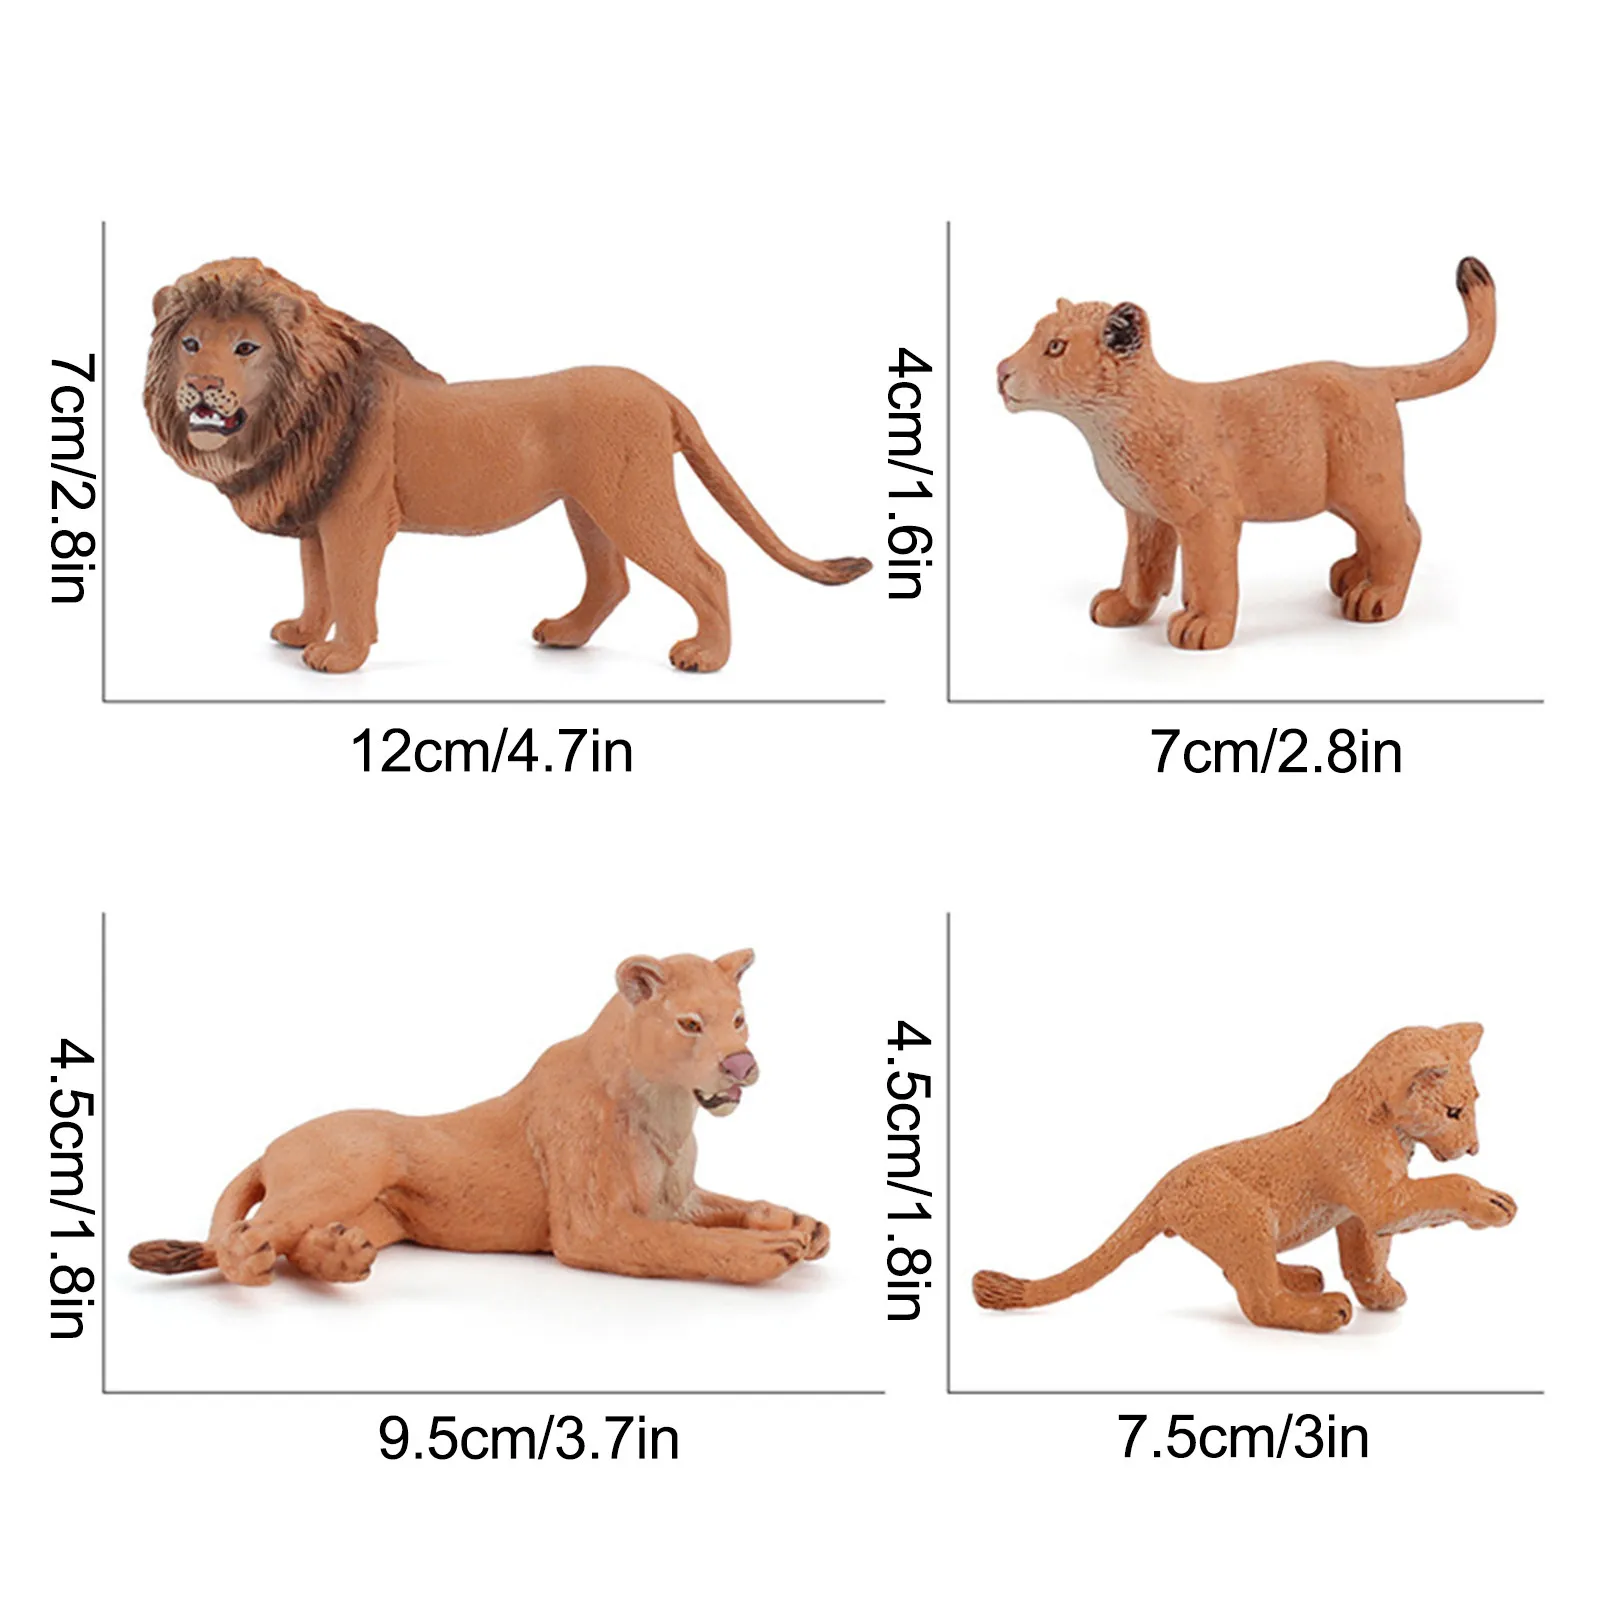 

Lion Animal Toy Figurines Fidget Toy Home Accessories Model Kawaii Toys Crafts Kids Gift Educational Clear Outline Lifelike